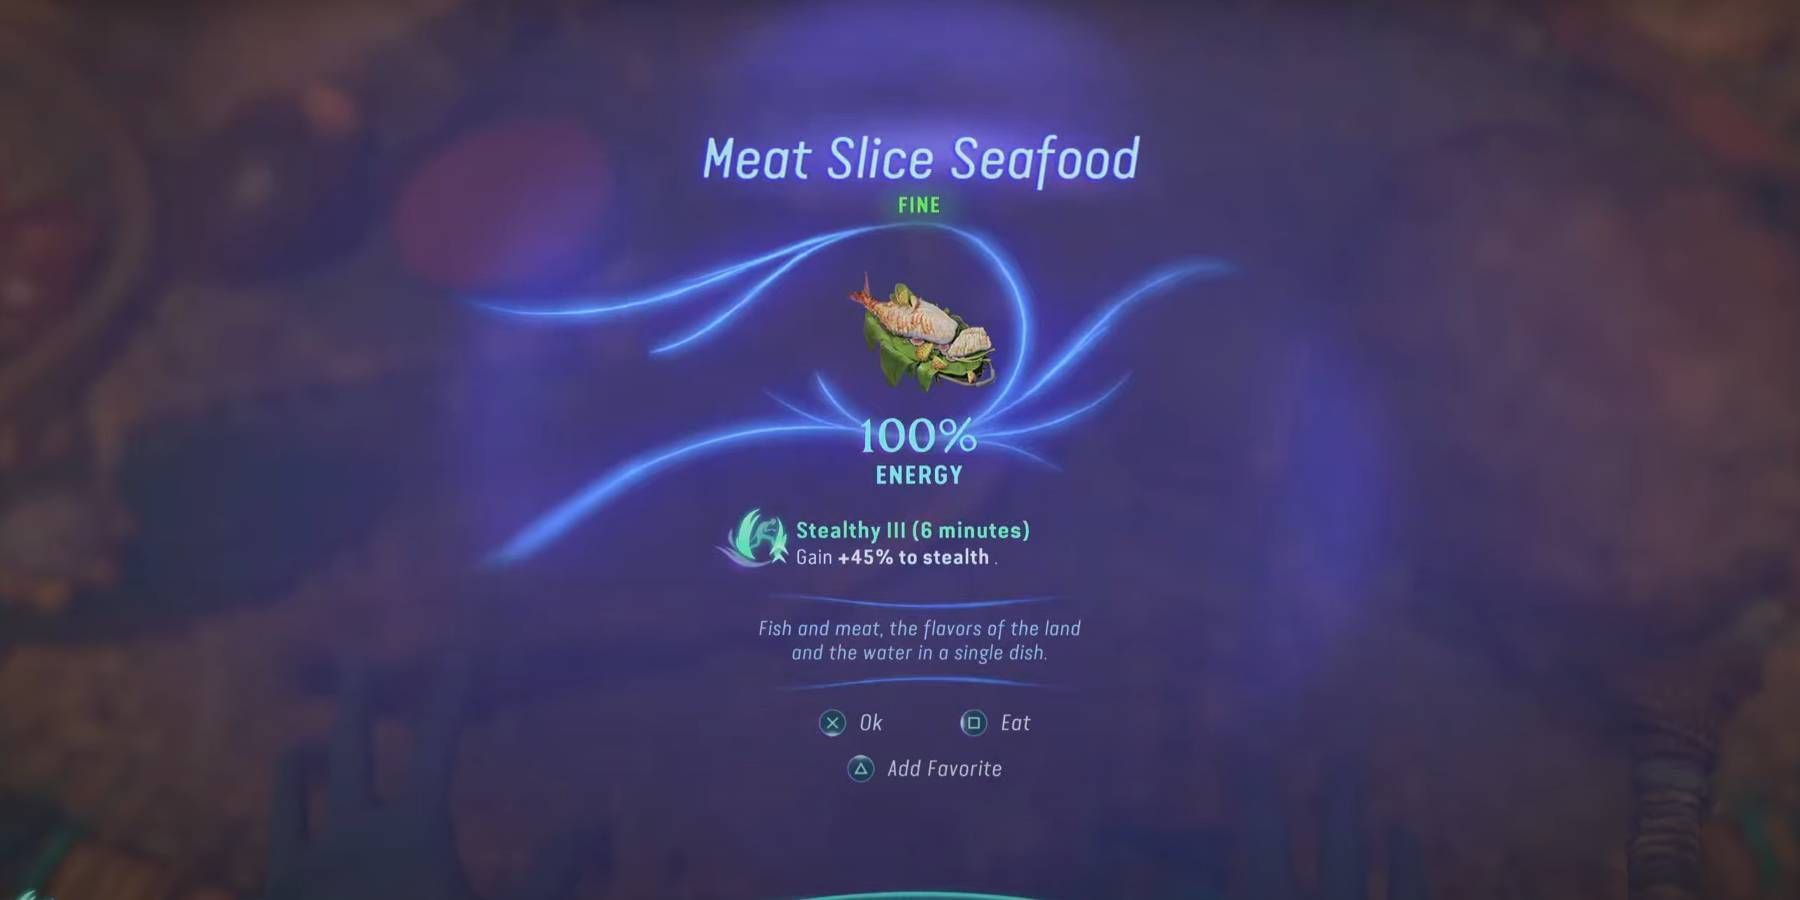 Avatar: Frontiers of Pandora Meat Slice Seafood Item that Gives Stealthy III Buff with Explanation of Ability